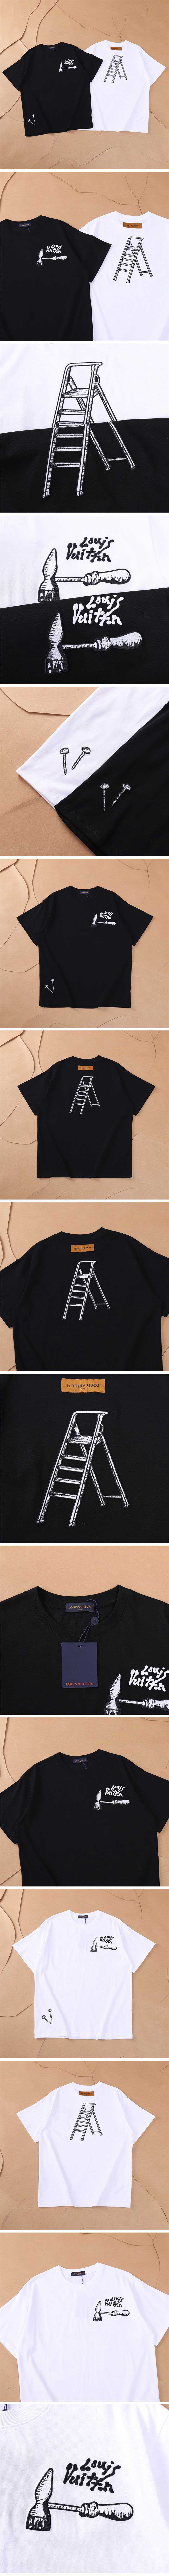 Louis Vuitton Tool Print Tee ルイヴィトン ツール プリント Tシャツ